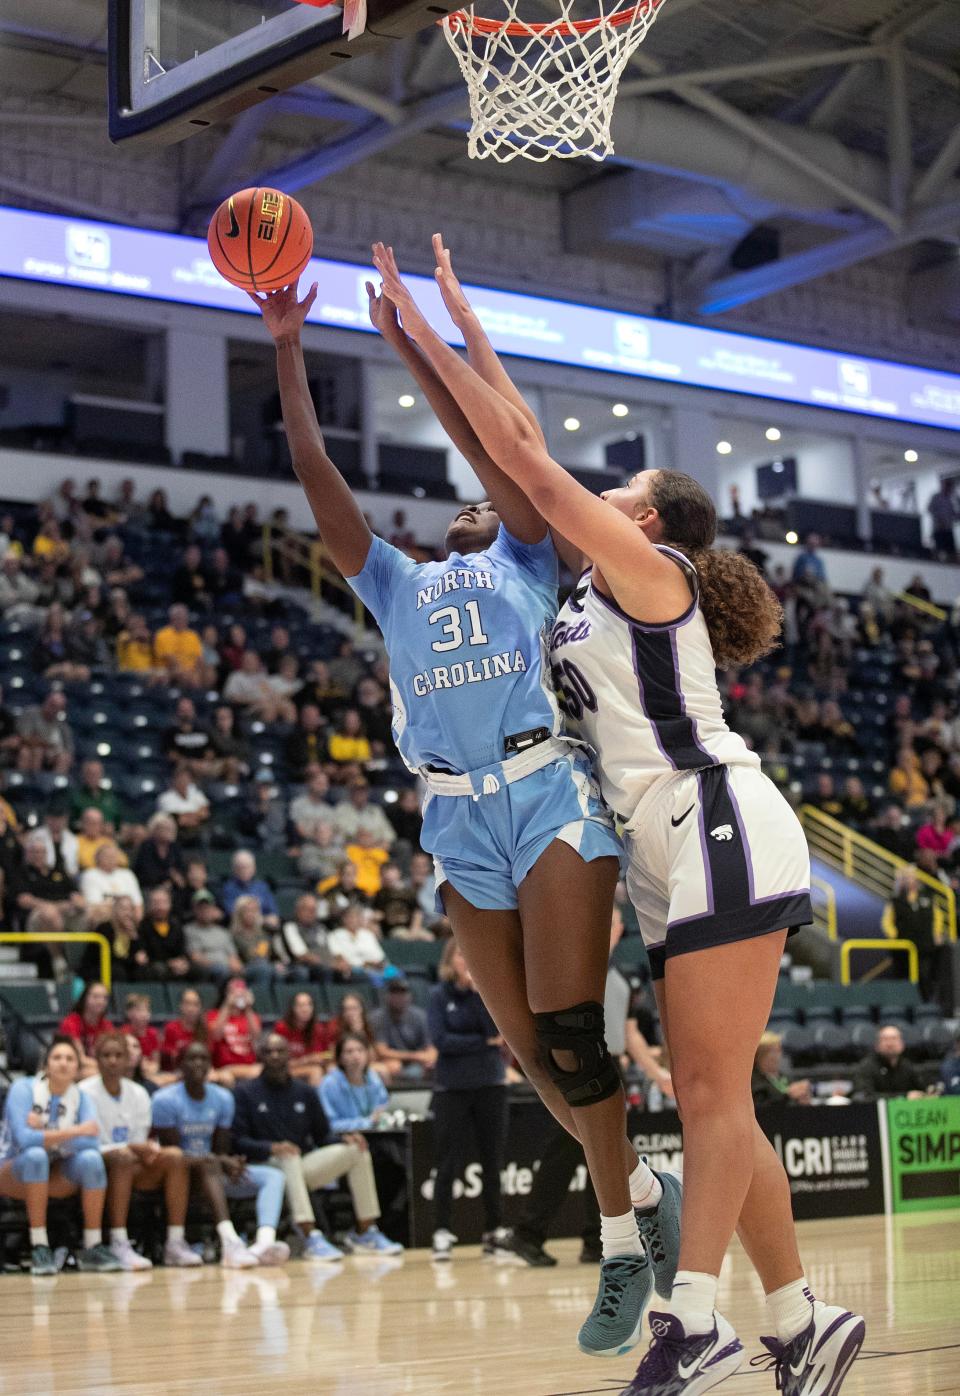 Anya Poole of UNC is guarded by Ayoka Lee of Kansas State as she takes a shot in the 2023 Women's Gulf Coast Showcase on Saturday, Nov. 25, 2023, at Hertz Arena in Estero.